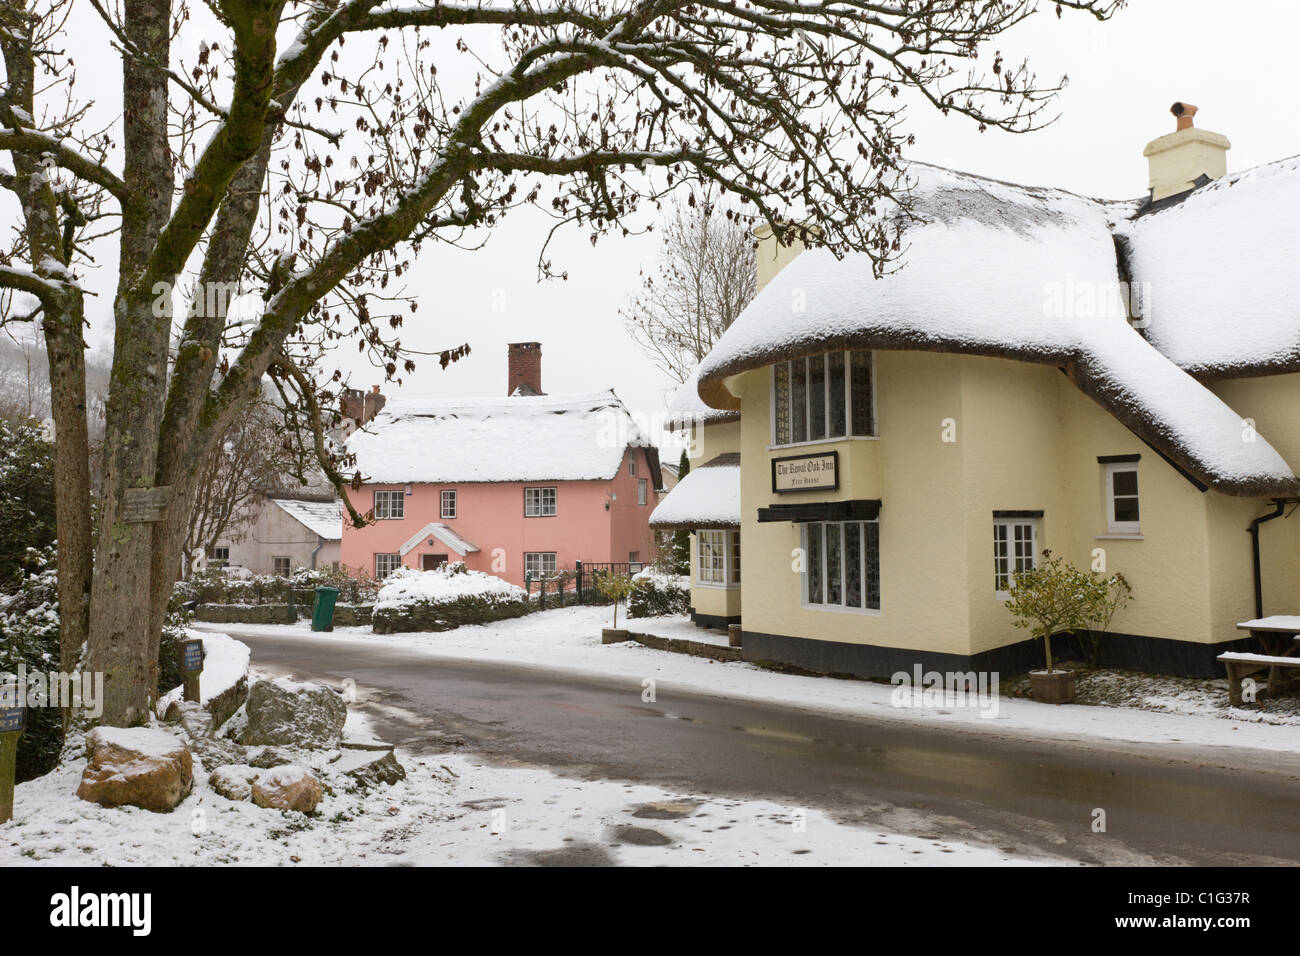 Snow covered country pub and cottages in the village of Winsford, Exmoor National Park, Somerset, England. Stock Photo